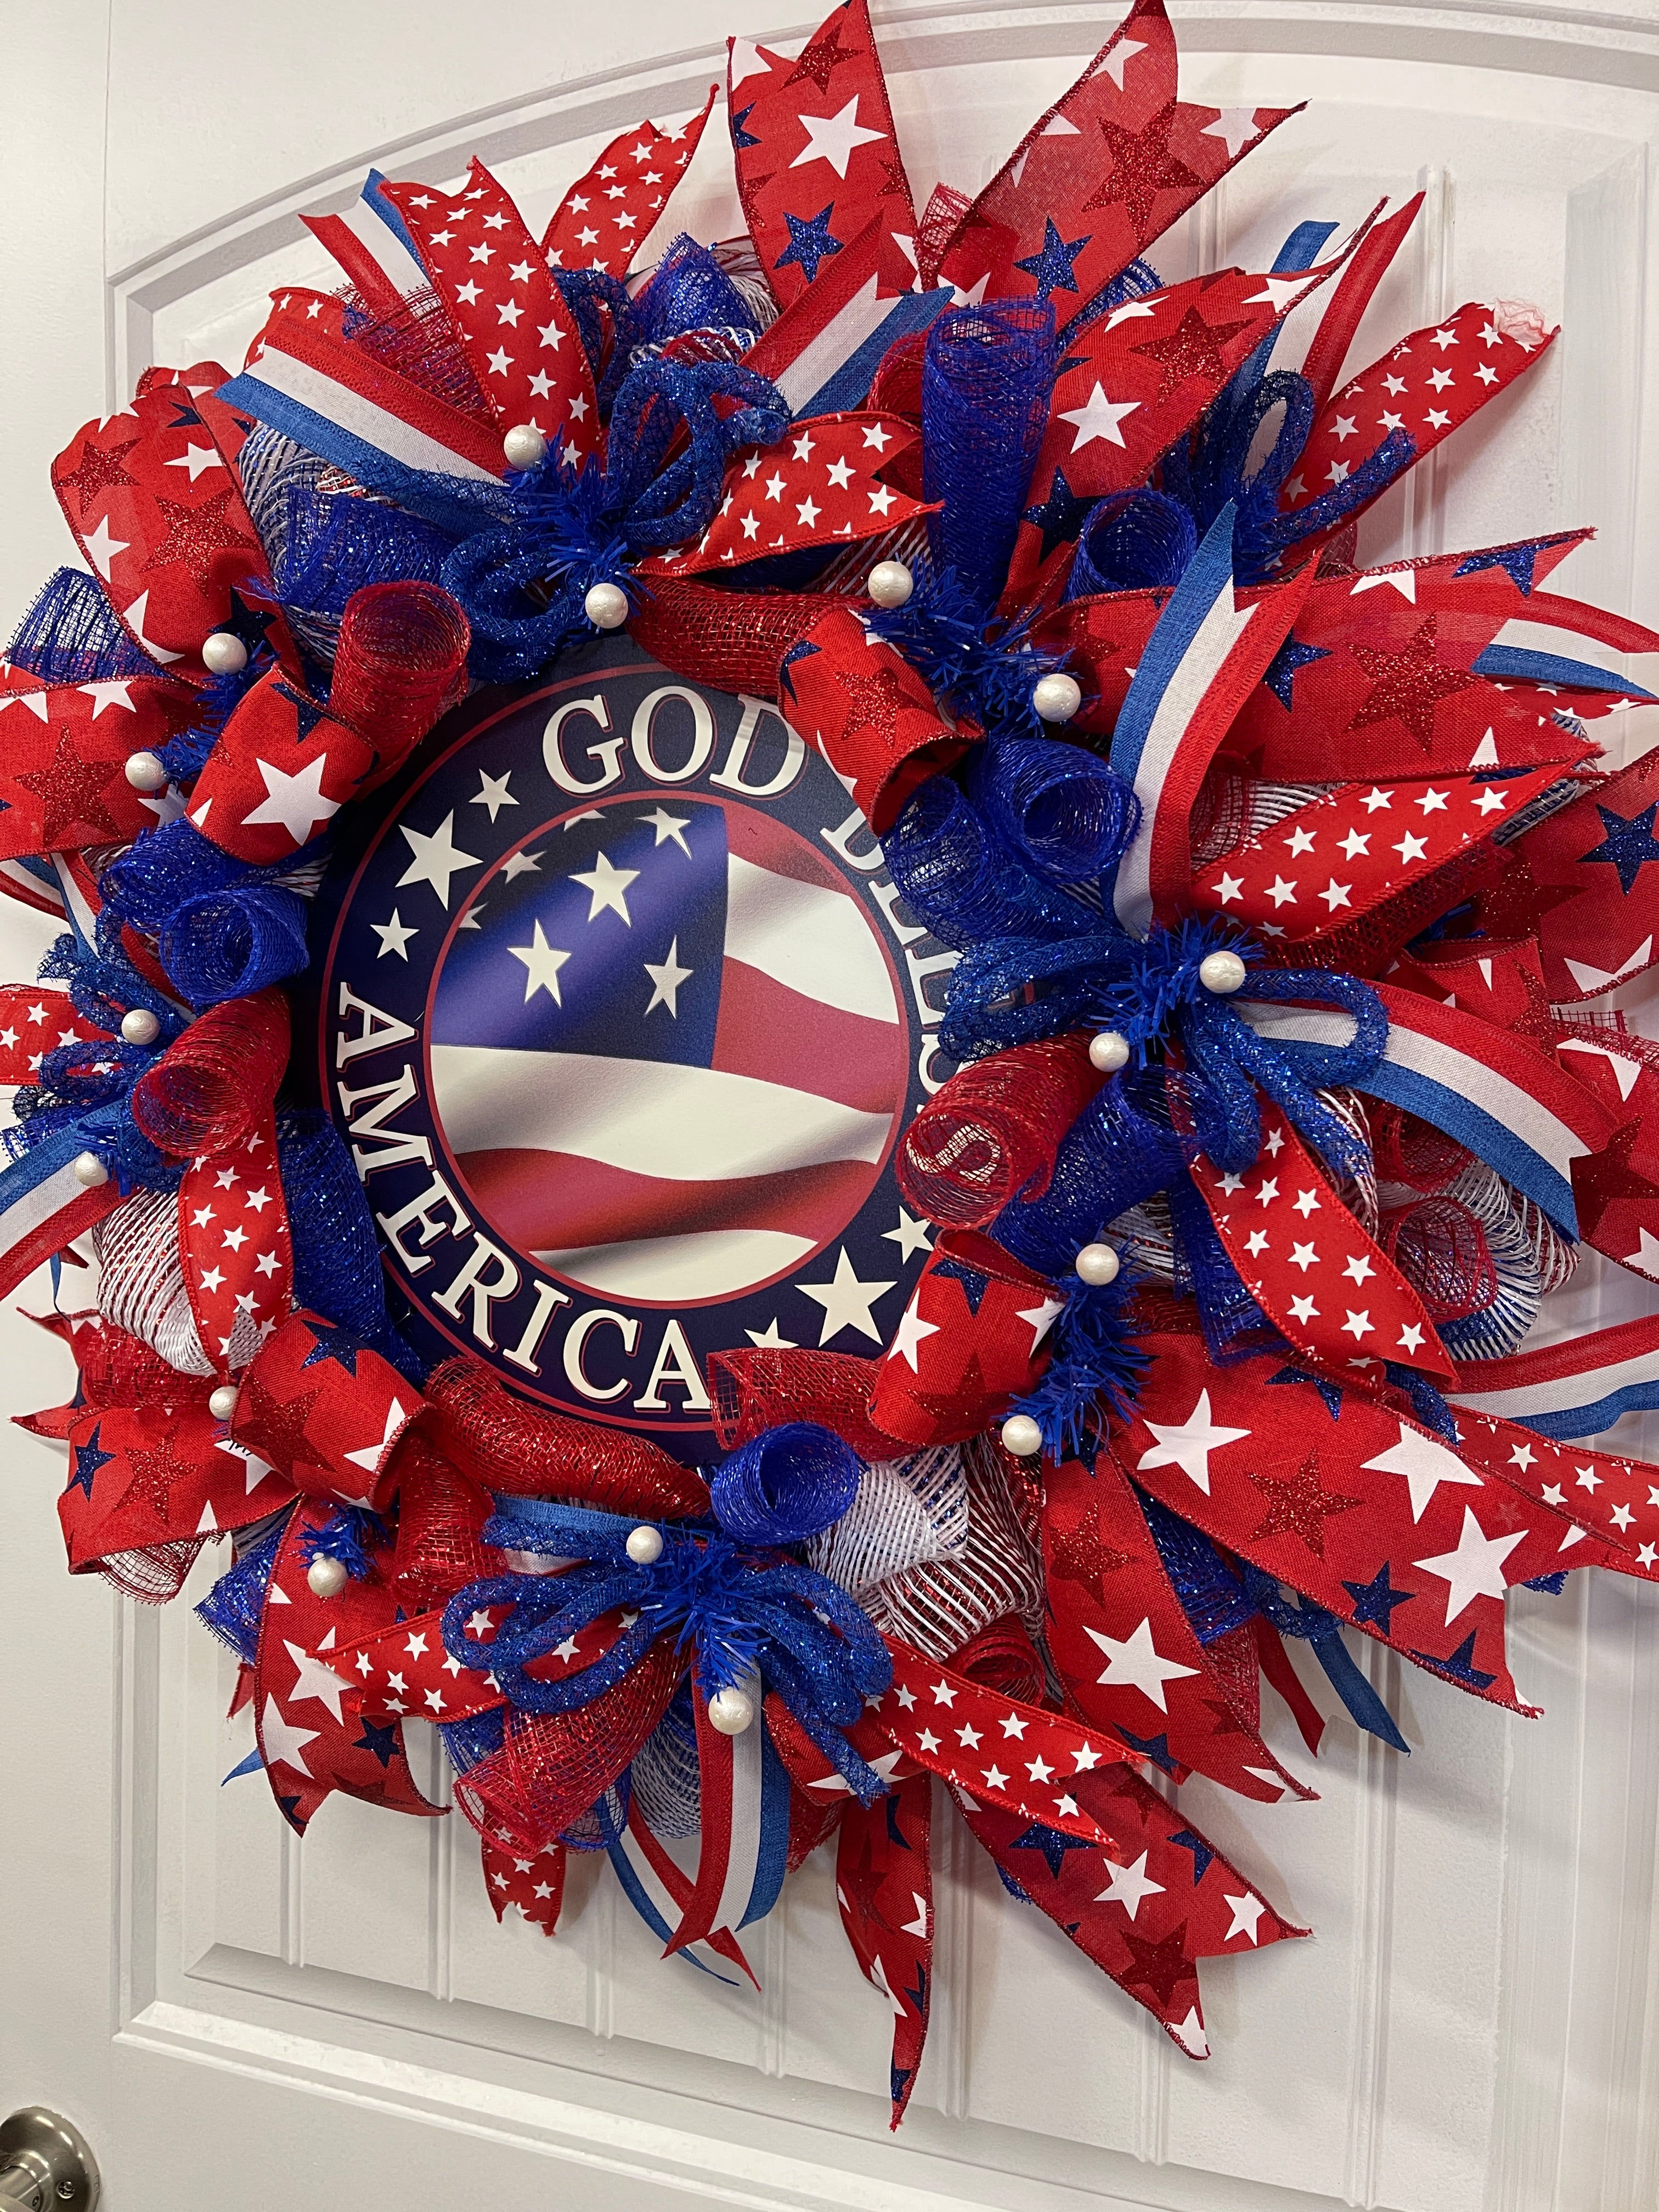 Right Side View of Red, White and Blue Stars and Stripes, God Bless America Deco Mesh Wreath on a White Door